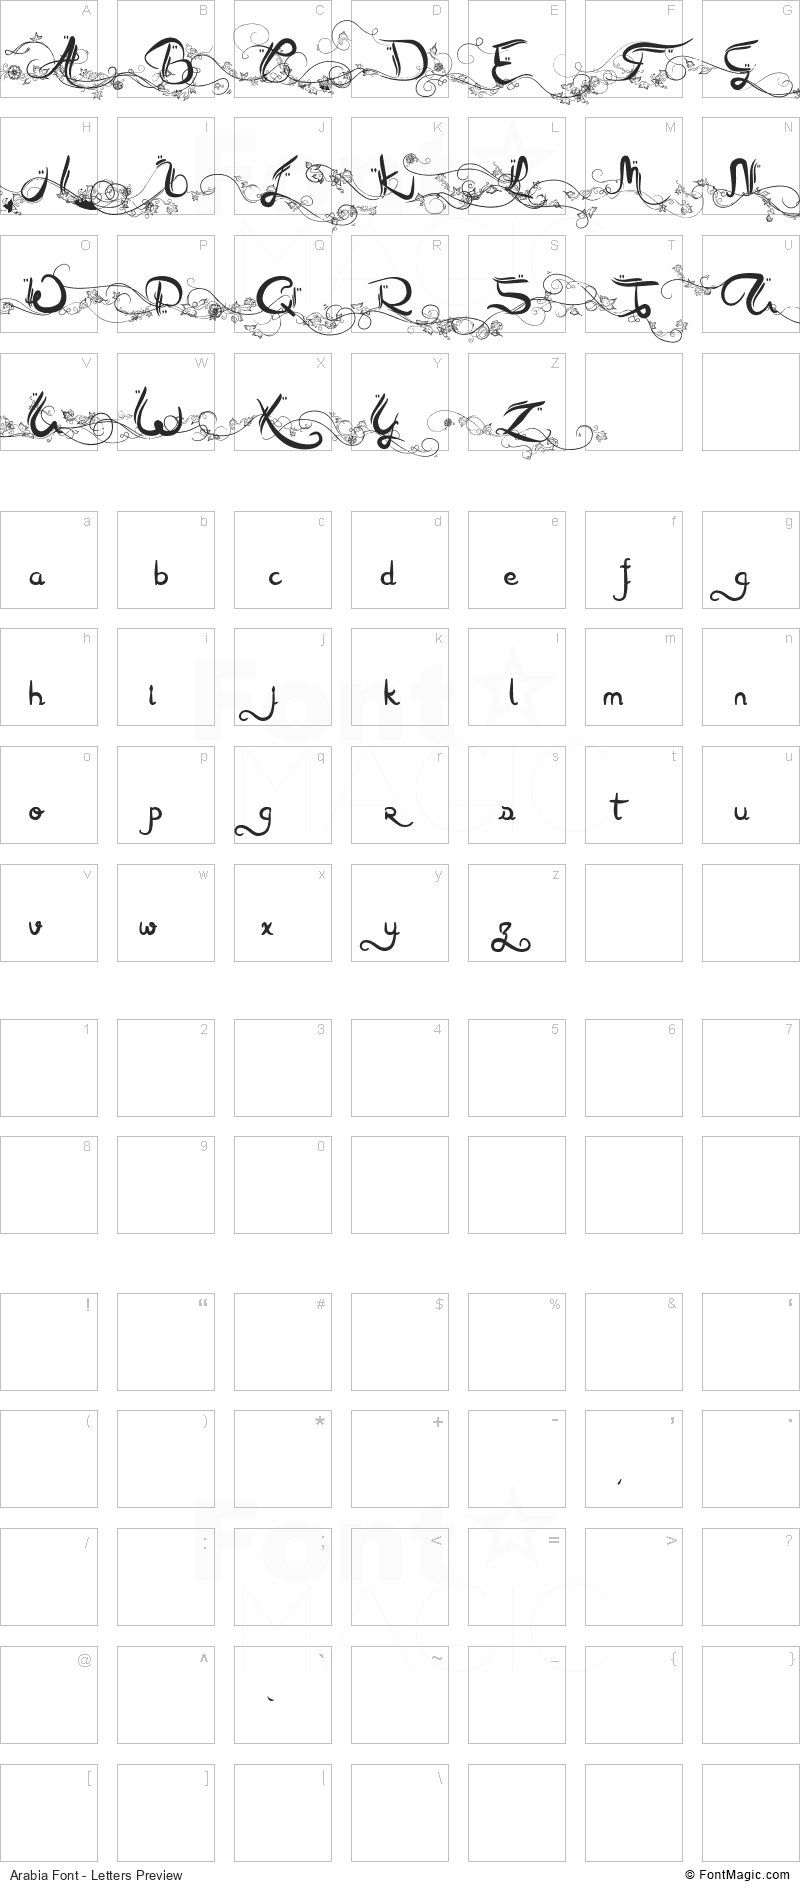 Arabia Font - All Latters Preview Chart